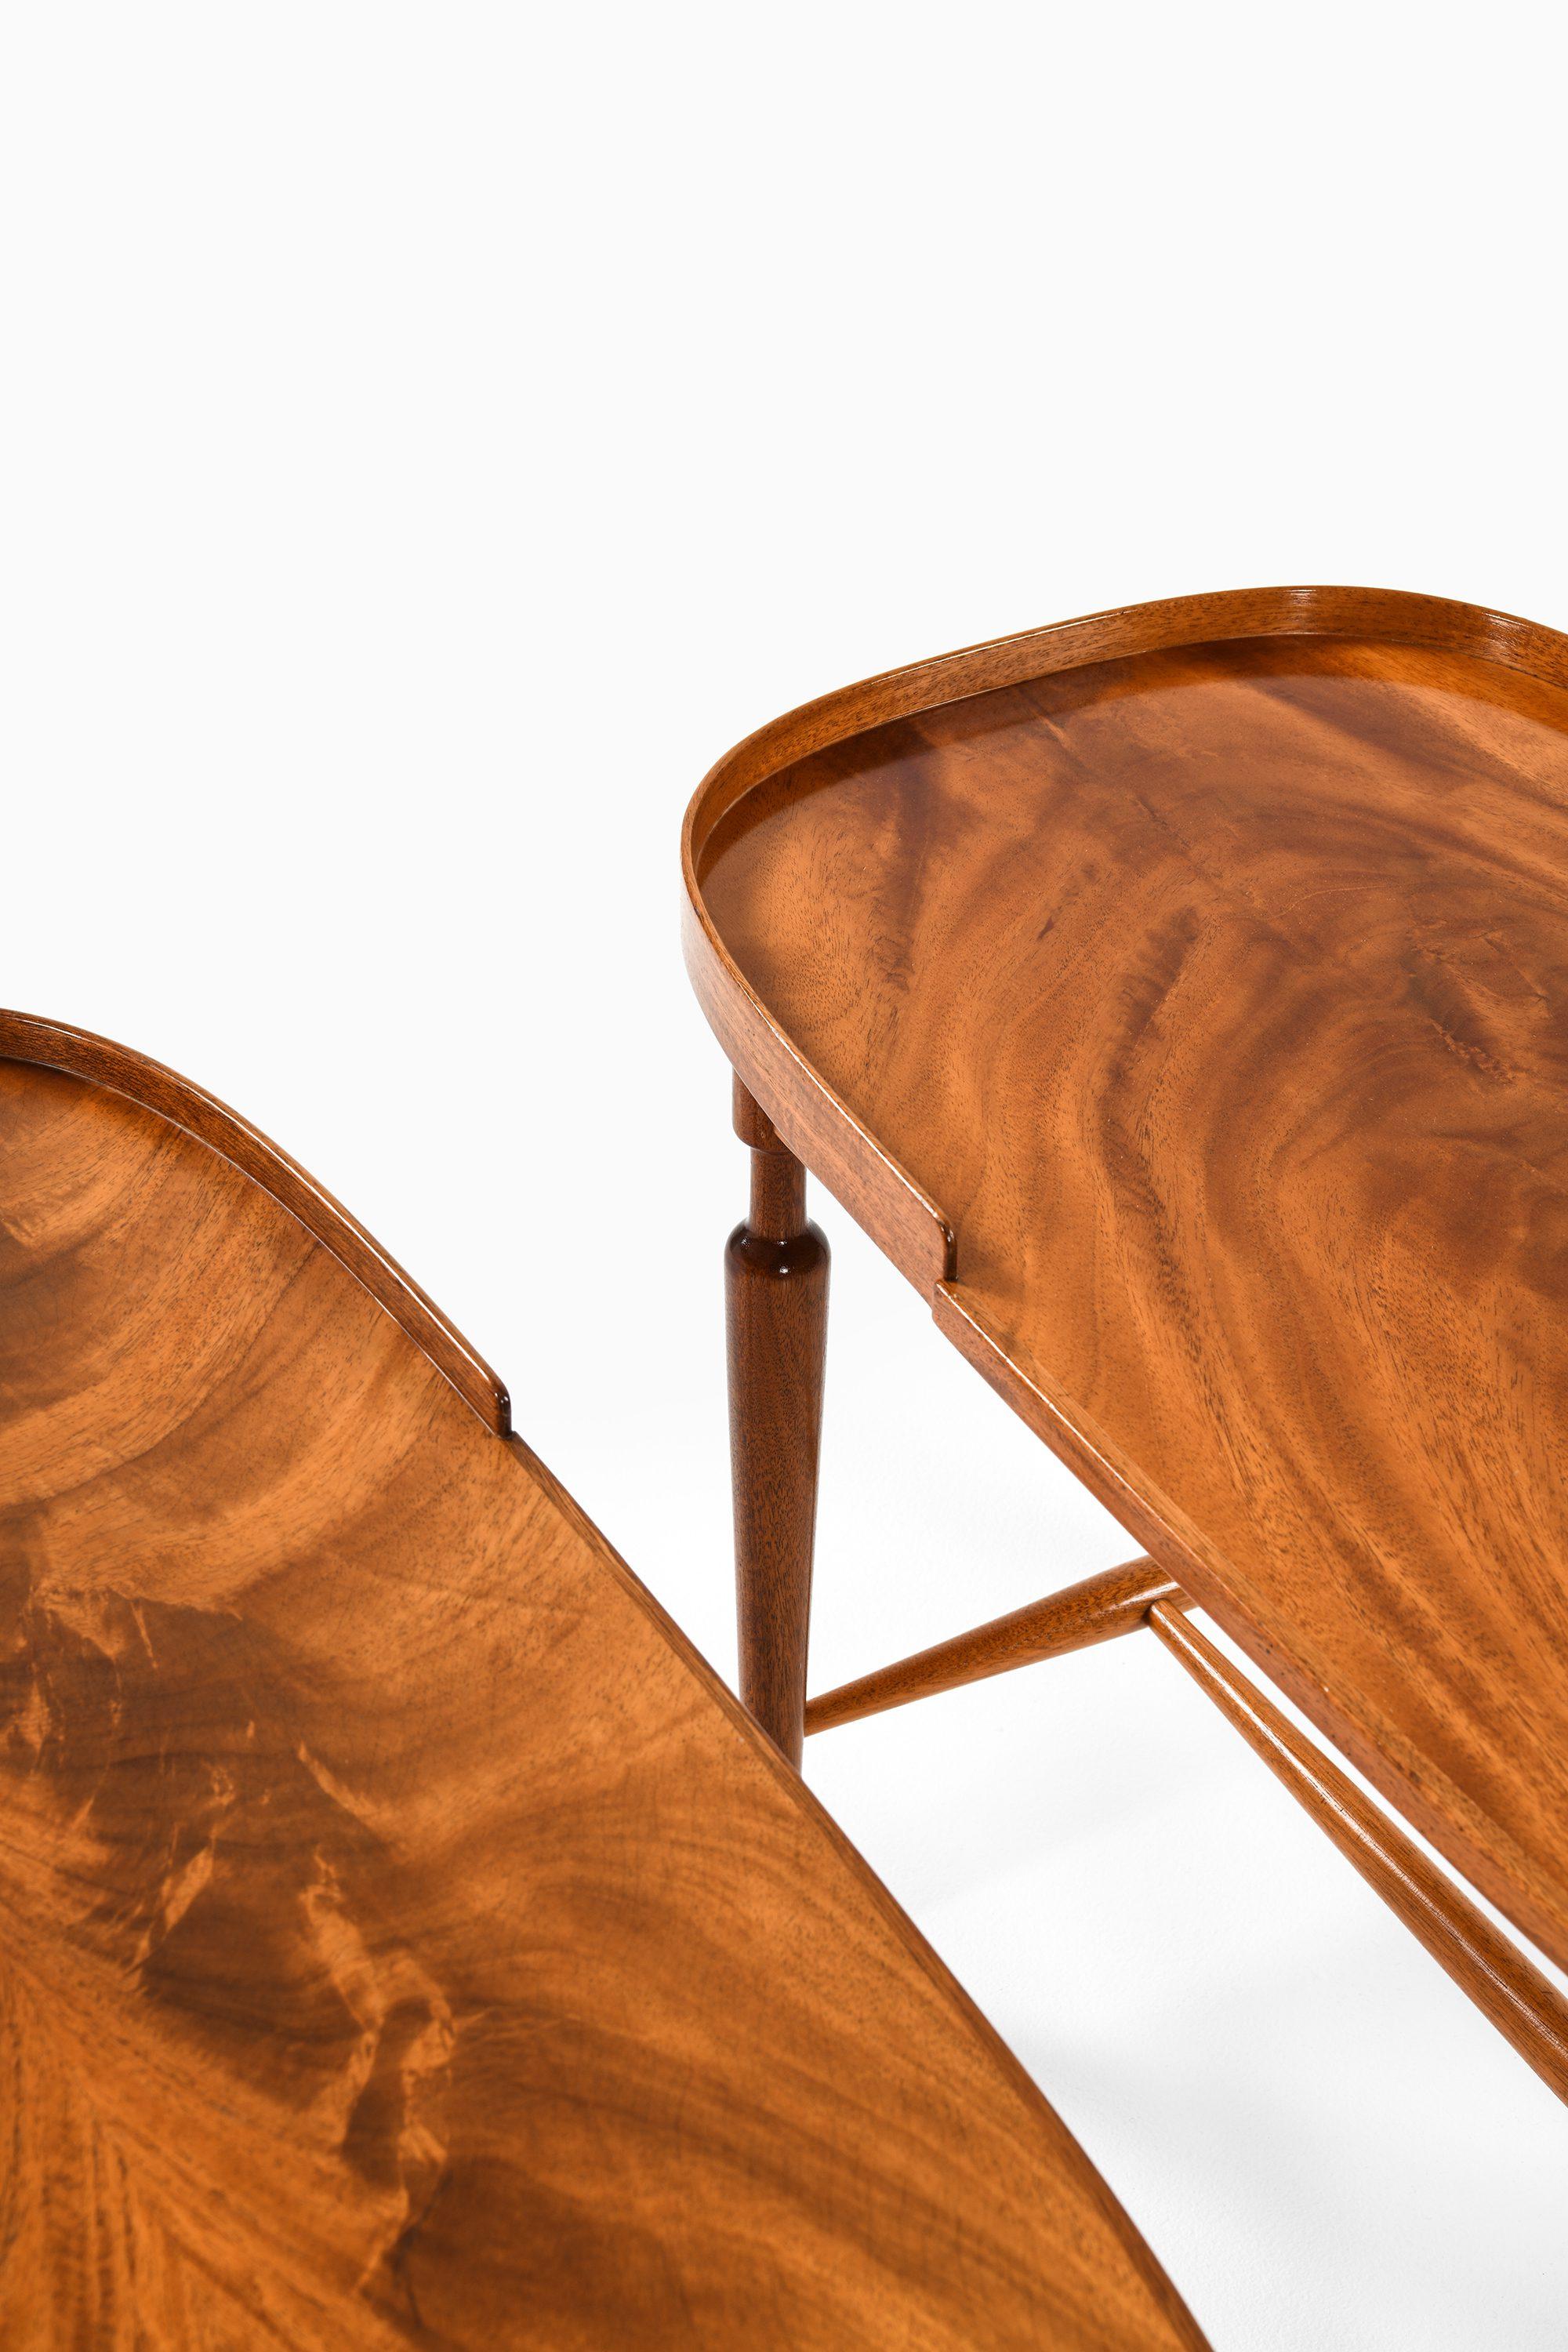 20th Century Pair of Side Table in Mahogany by Josef Frank, 1939 For Sale